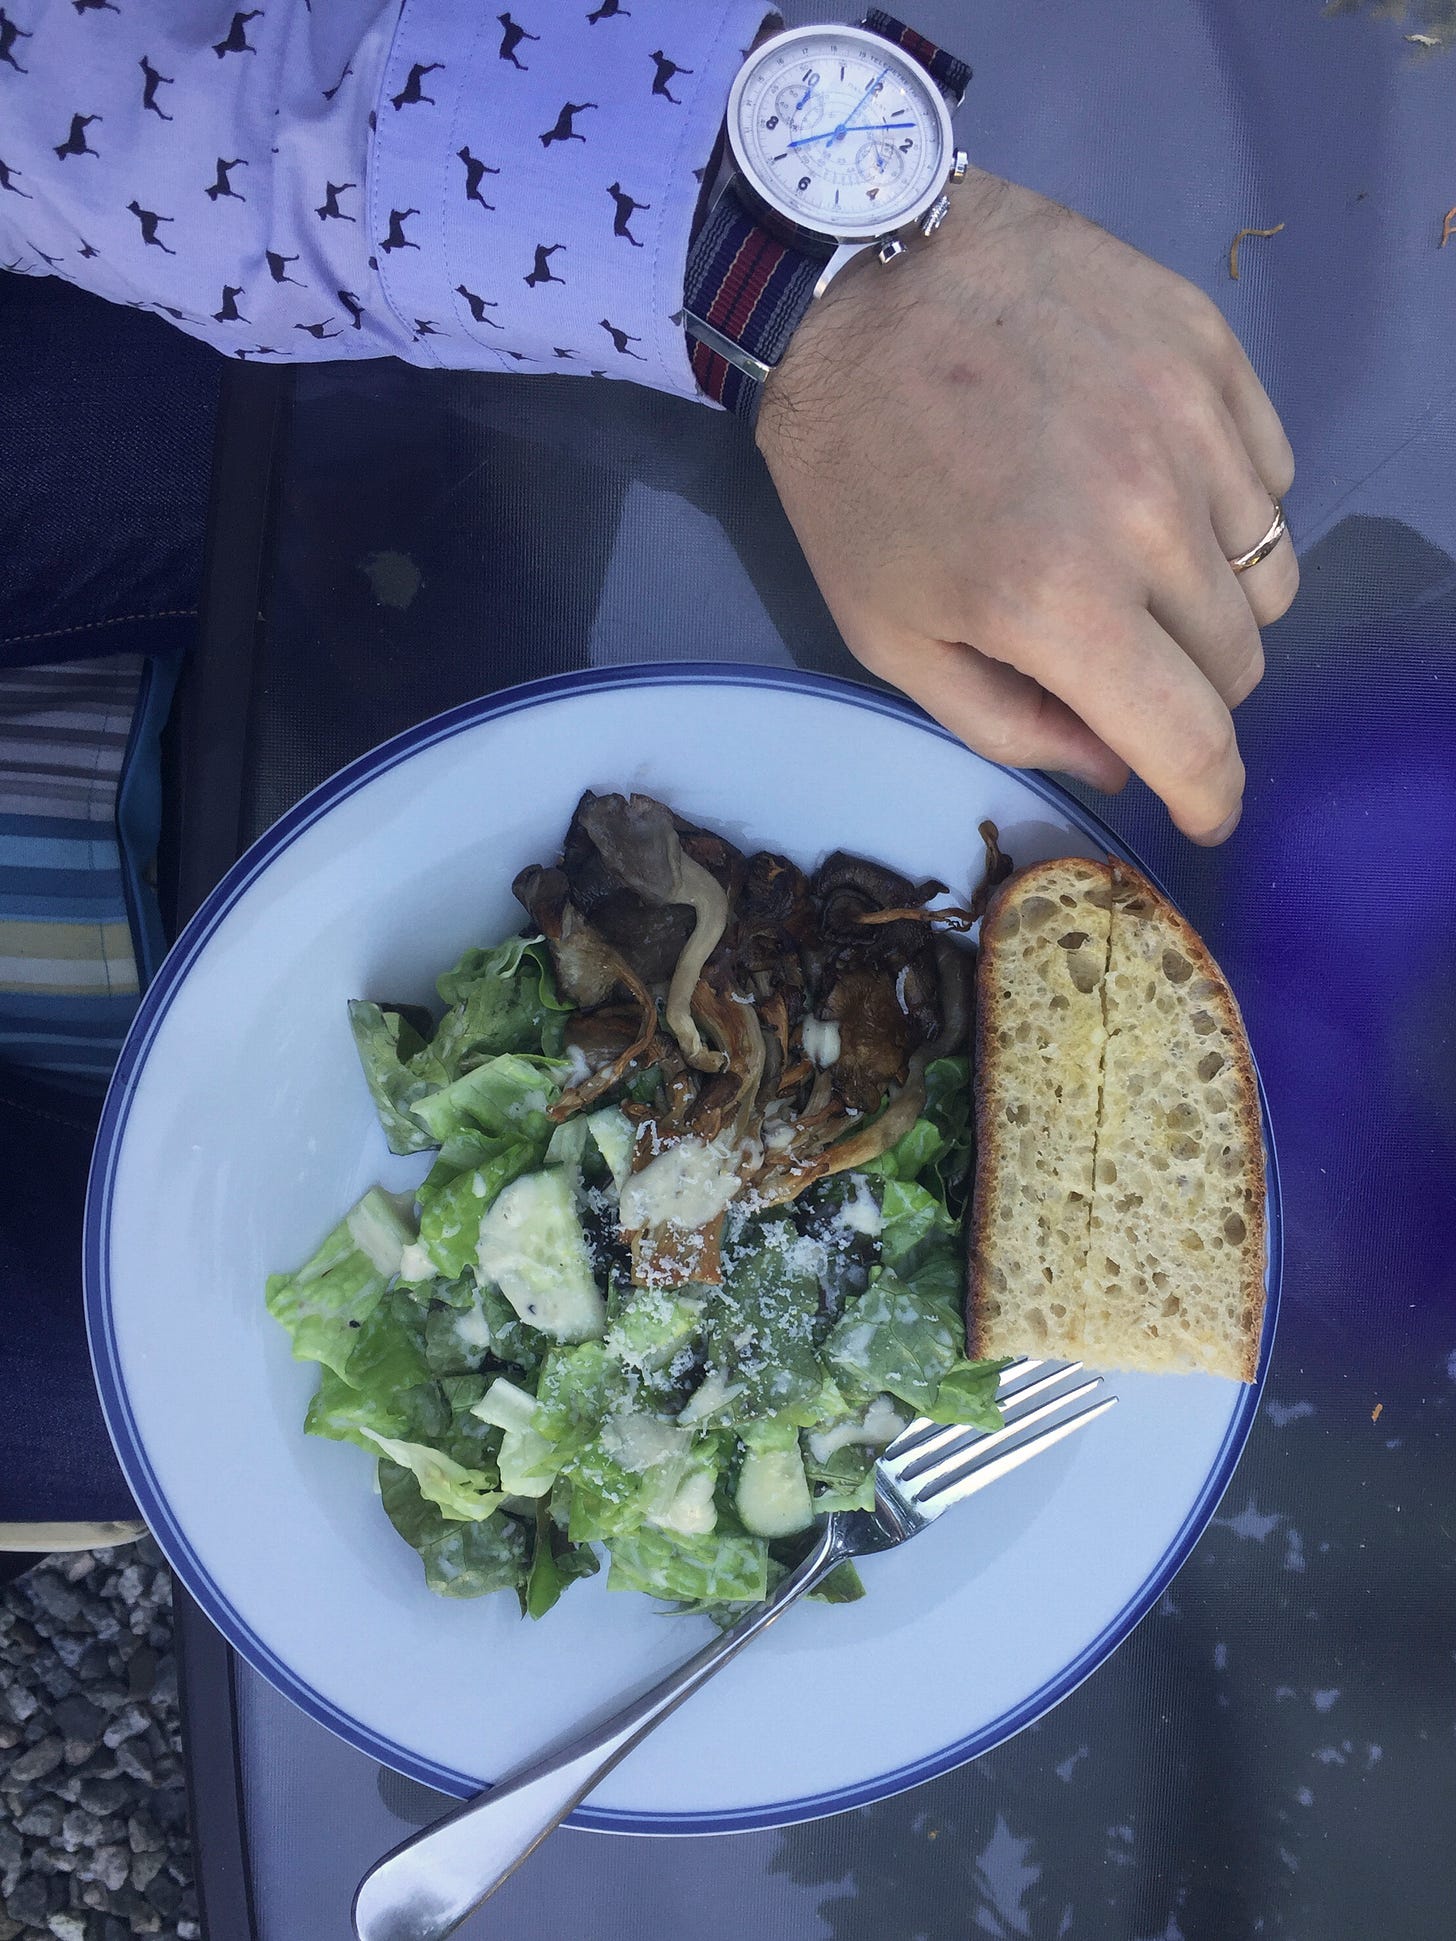 A dinner plate with a Caesar salad on it, pieces of cucumber and finely grated parmesan cheese on top. Draped over one side is a flattened bunch of seared oyster mushrooms, and at the edge of the plate is a large slice of garlic bread. Jeff's hand is visible at the top of the frame.